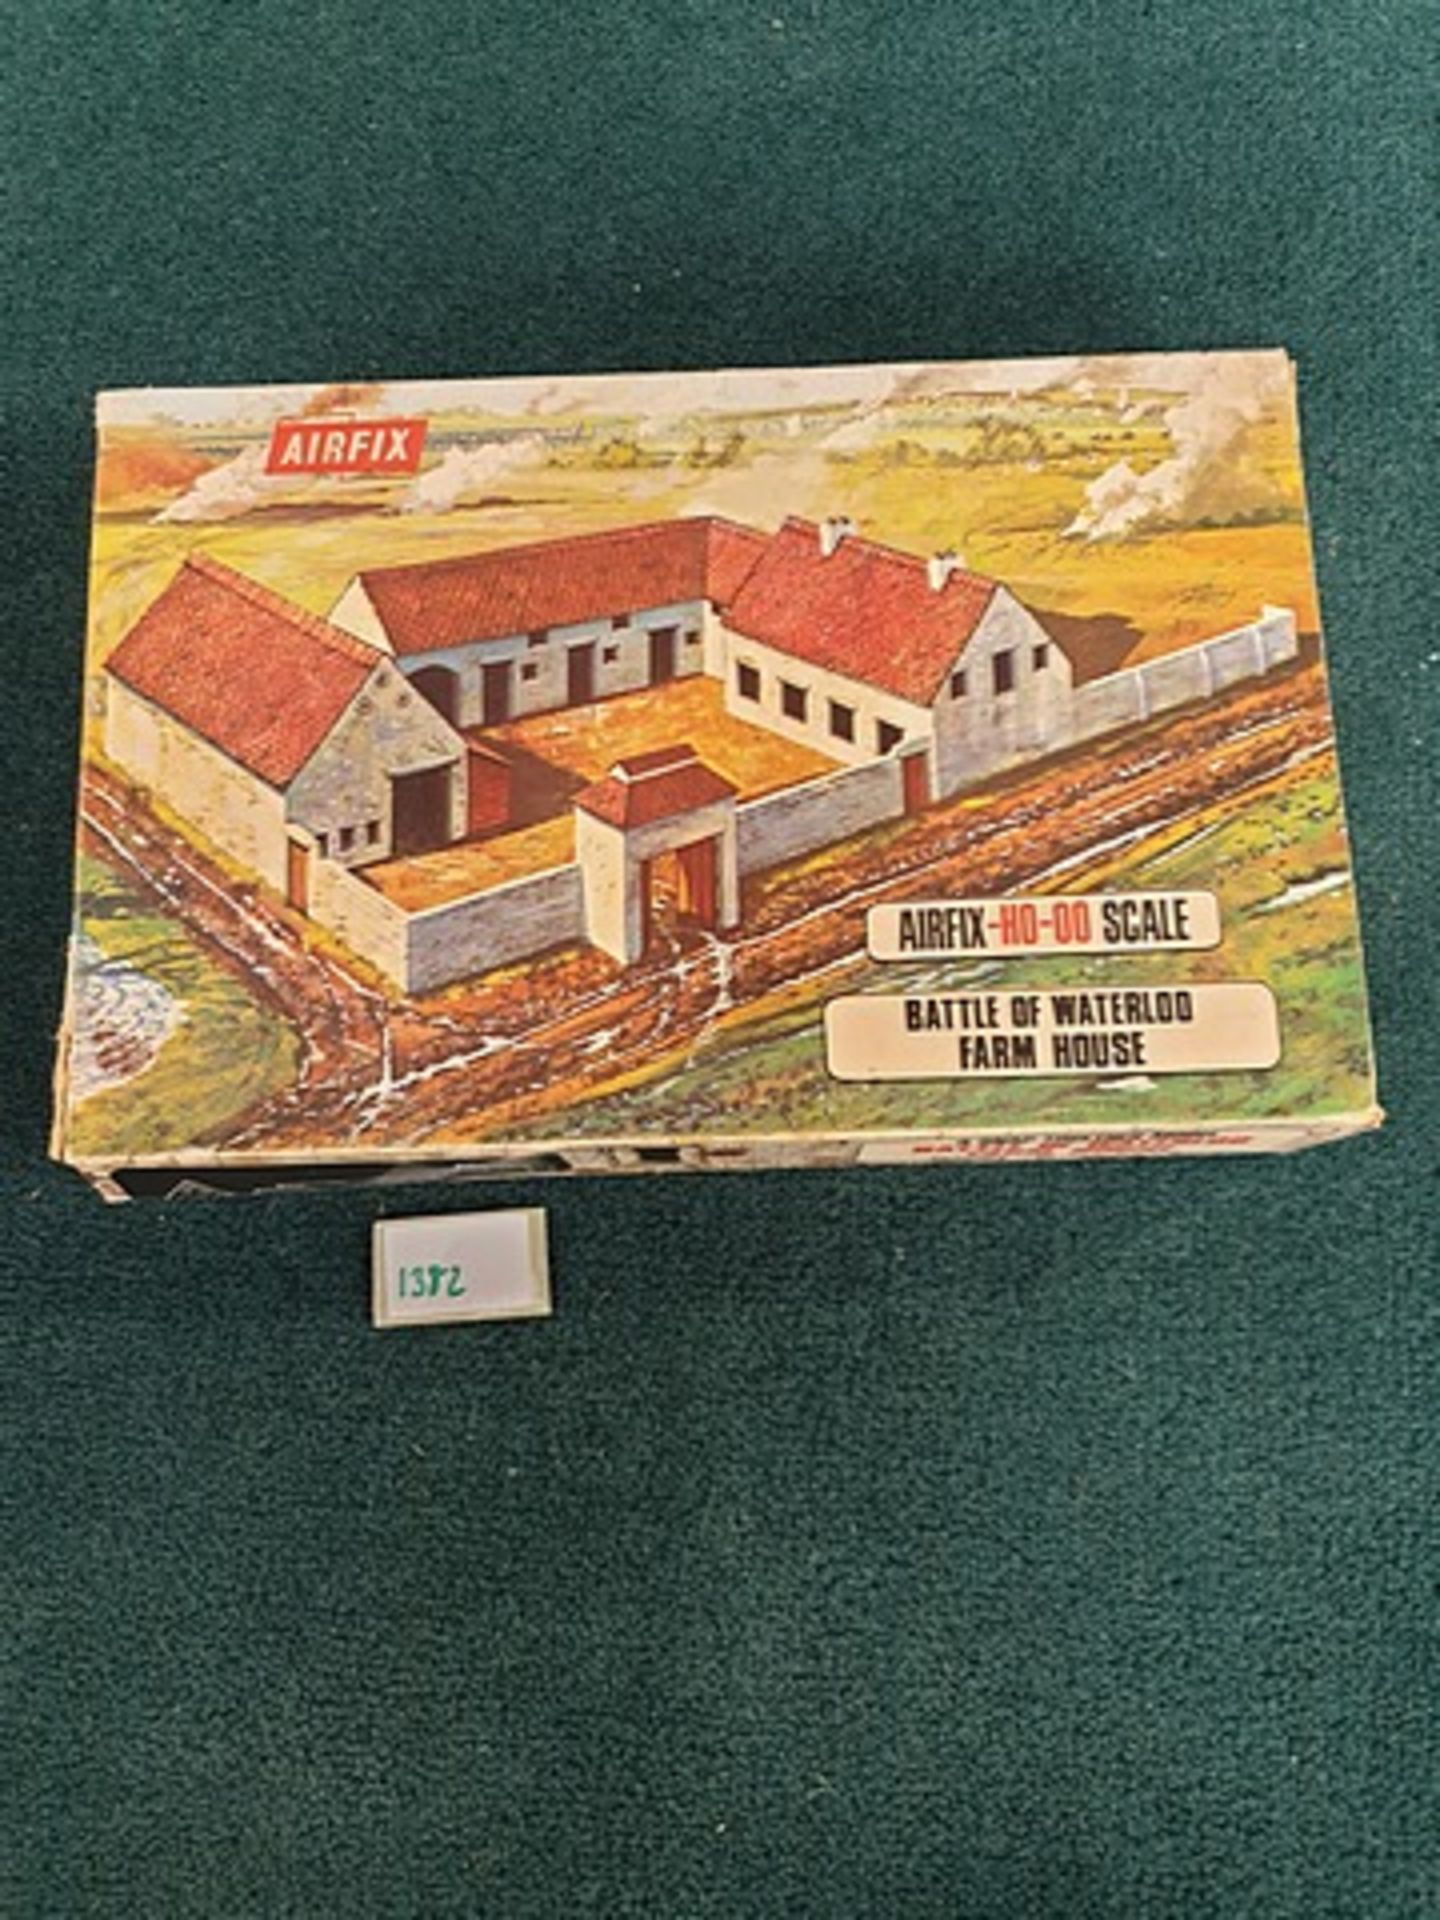 Airfix Model Kit H0-00 Scale Cat # 1709 - 298 Battle Of Waterloo Farm House Complete With Box